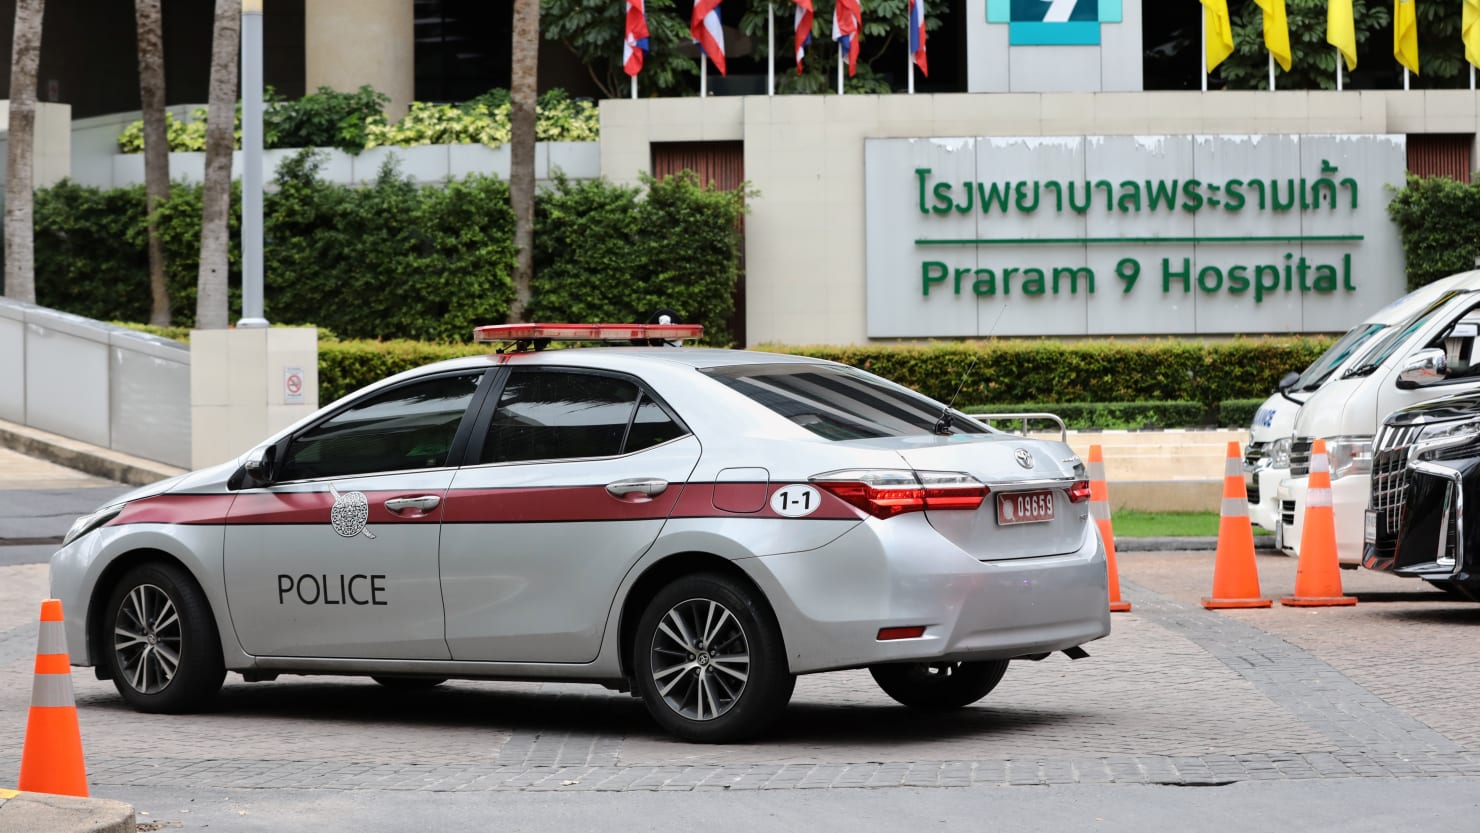 Two U.S. Nationals Killed in Bizarre Cyanide Plot at Thailand Hotel